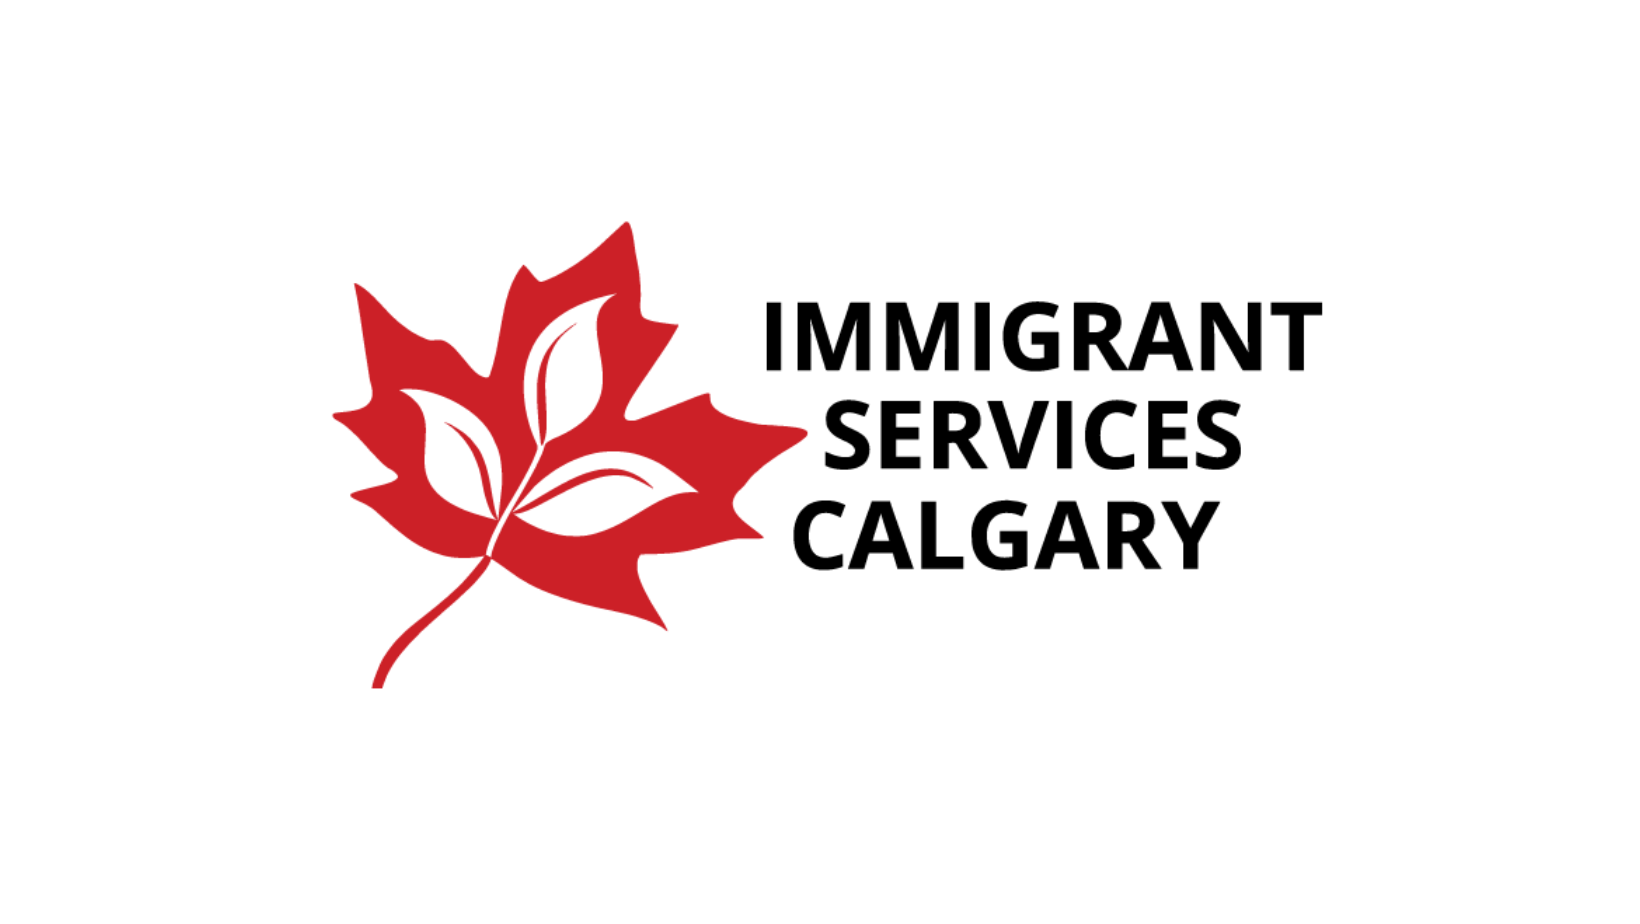 Immigrant Services Calgary Leadership Update